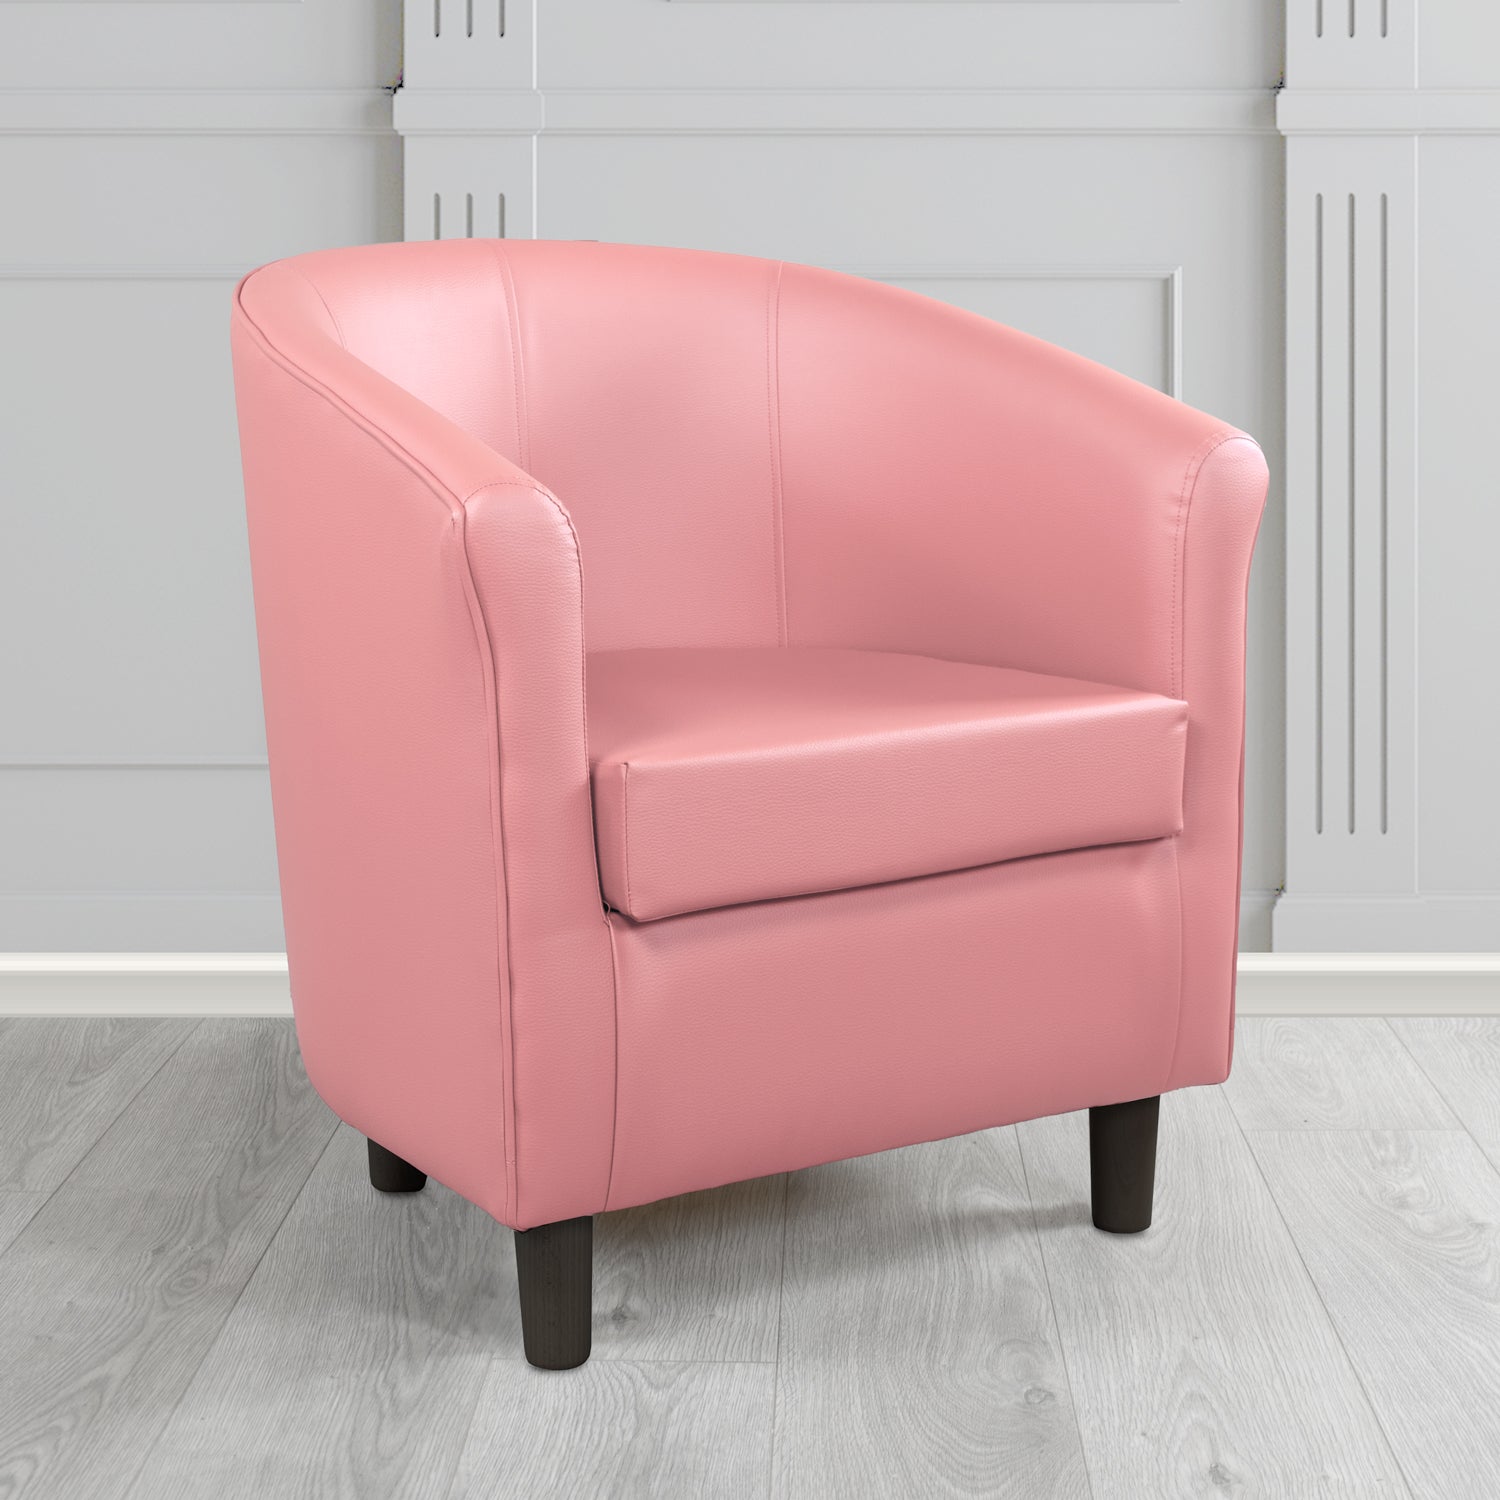 Tuscany Just Colour Cherry Blossom Antimicrobial Crib 5 Contract Faux Leather Tub Chair - The Tub Chair Shop